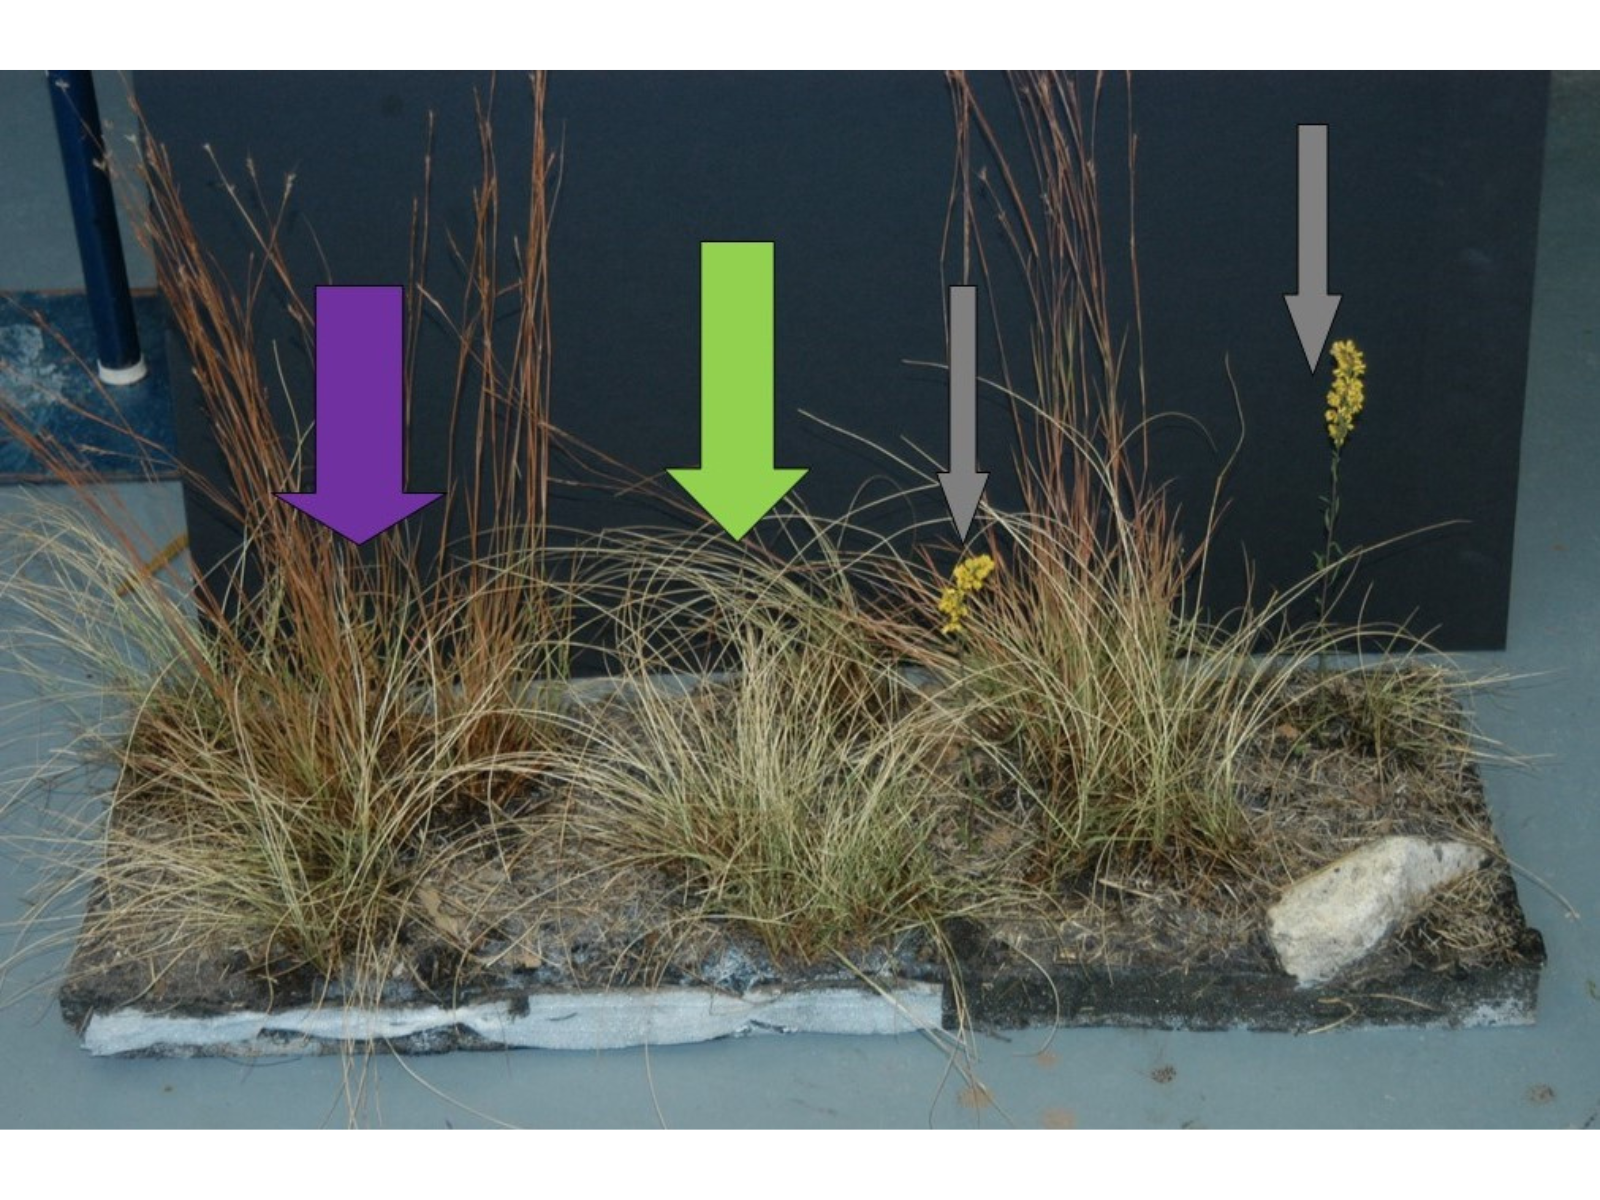 The repaired piece of diorama ground from the previous four images. The portion now has upright specimens of Little Blue stem grass (signified with a purple arrow), Stipa grass (green arrow), and Slender Goldenrod flowers (two grey arrows).